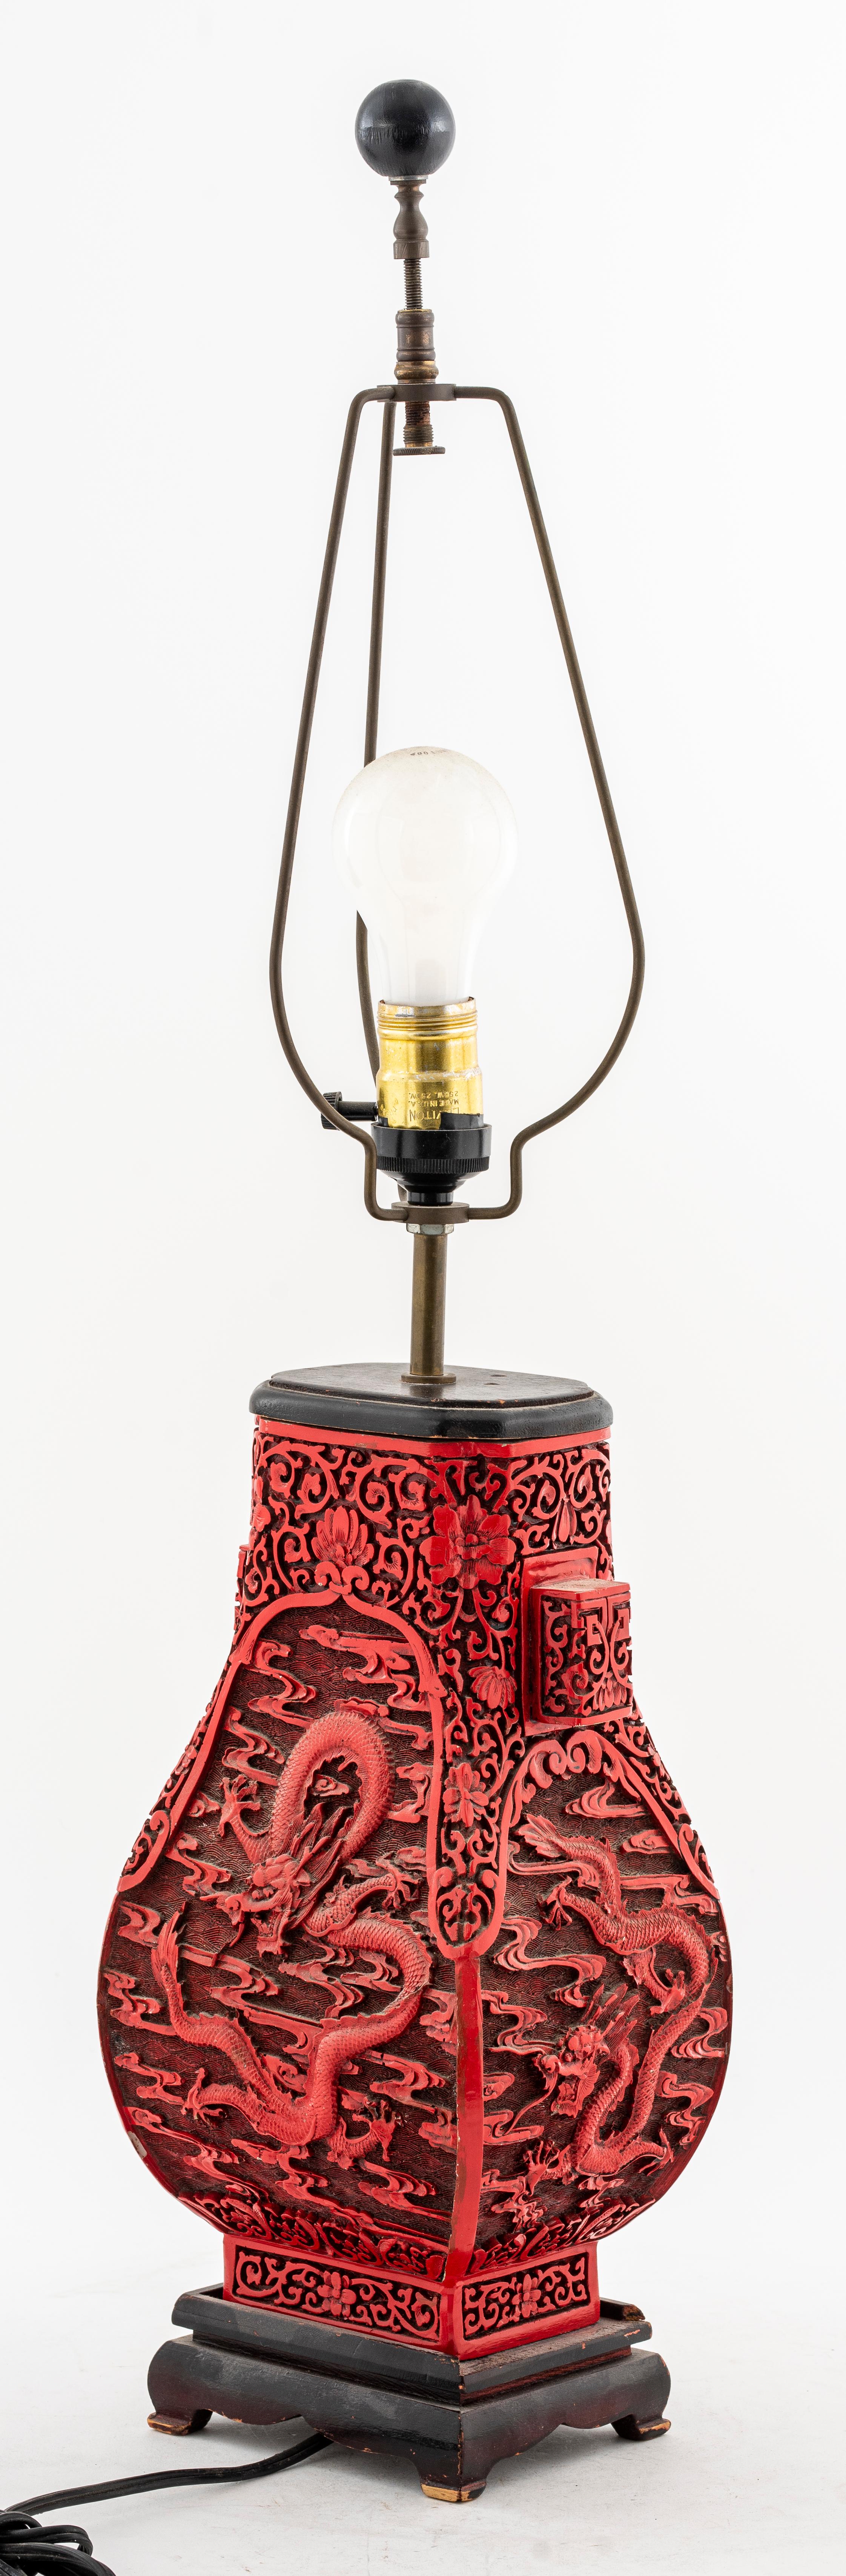 Enamel Chinese Cinnabar Lamp with Dragon Motif For Sale